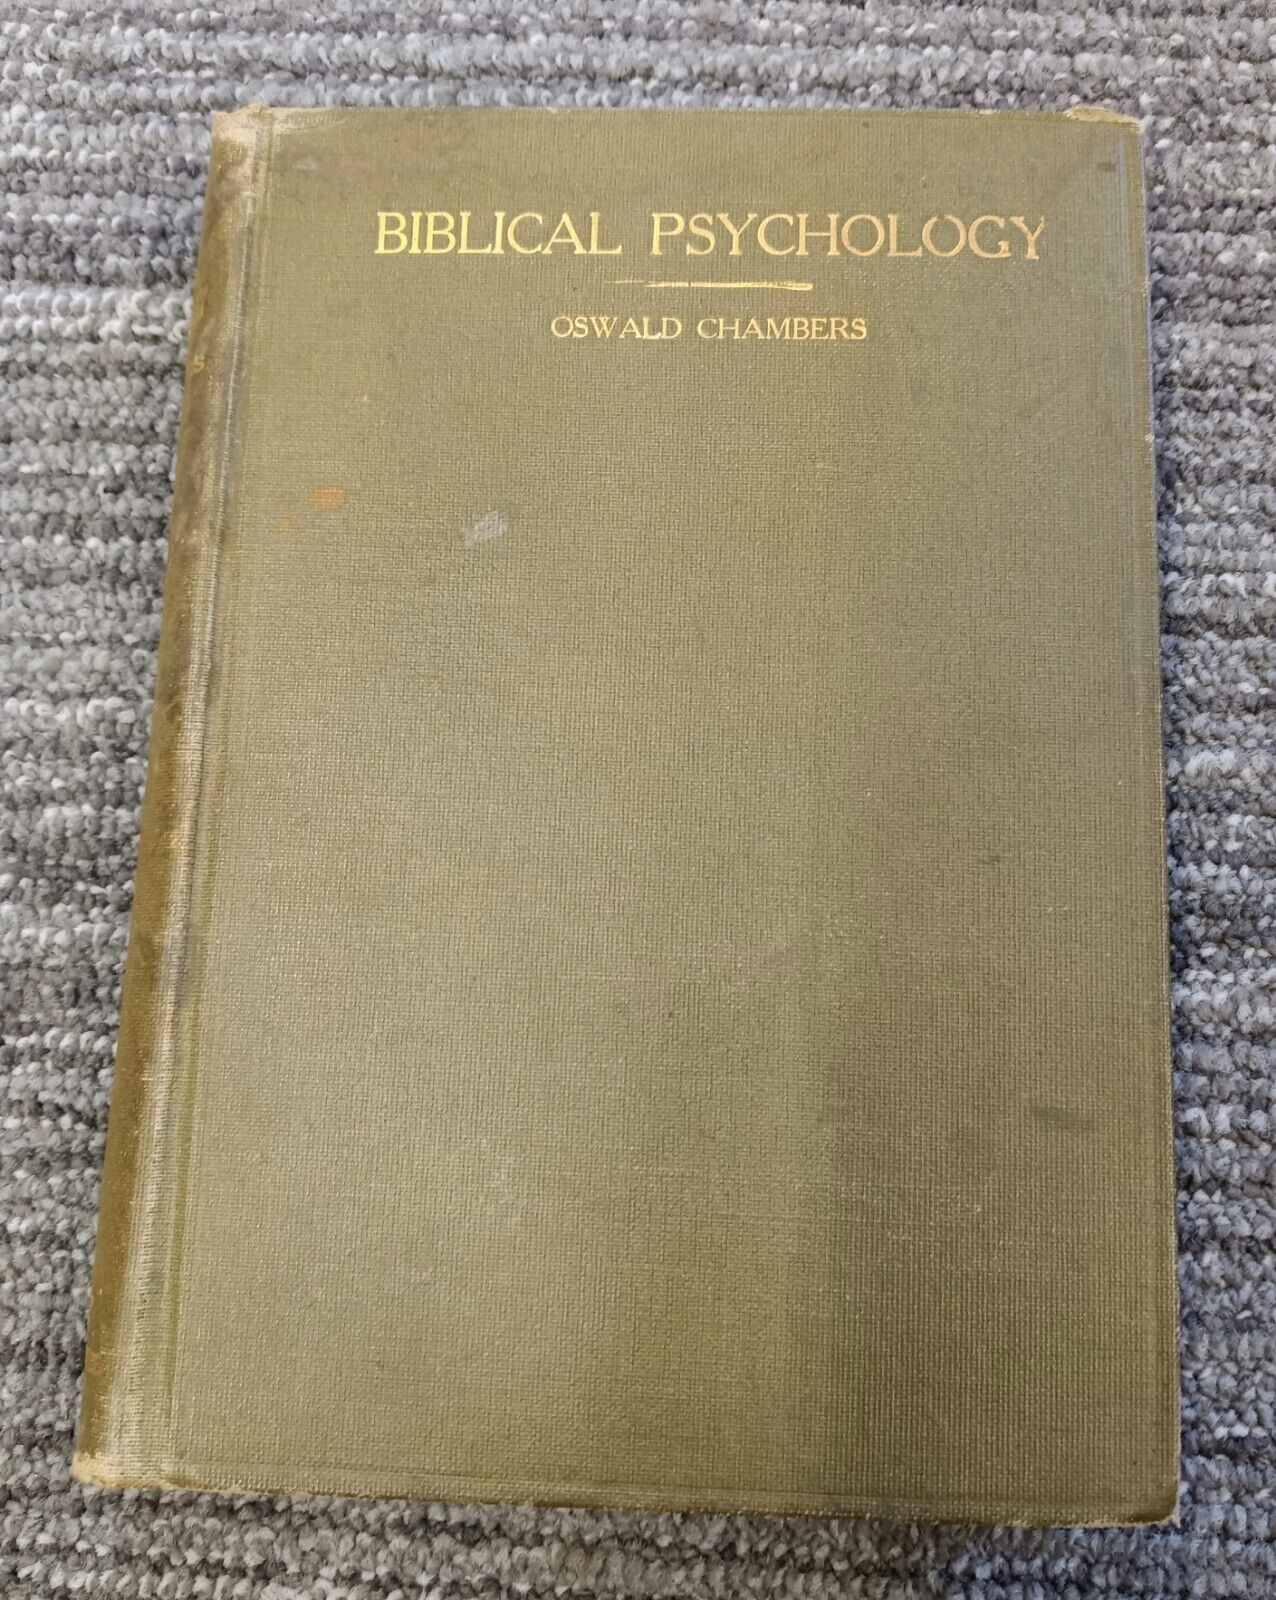 Extremely Rare/Vintage 1st Edition OSWALD CHAMBERS 